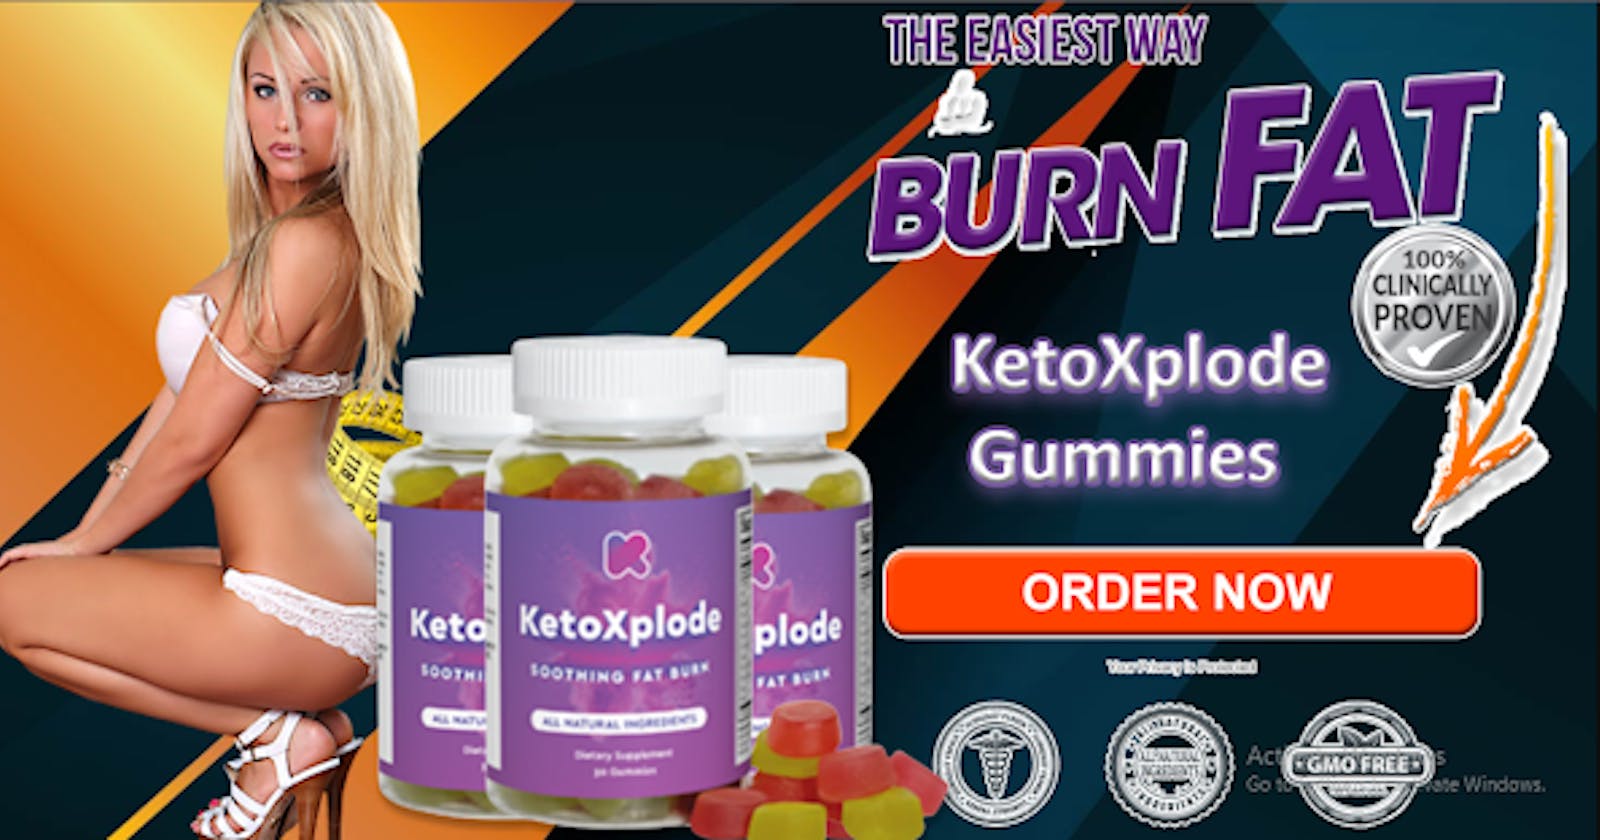 KetoXplode Gummies Germany Official Cost, Benefits and More